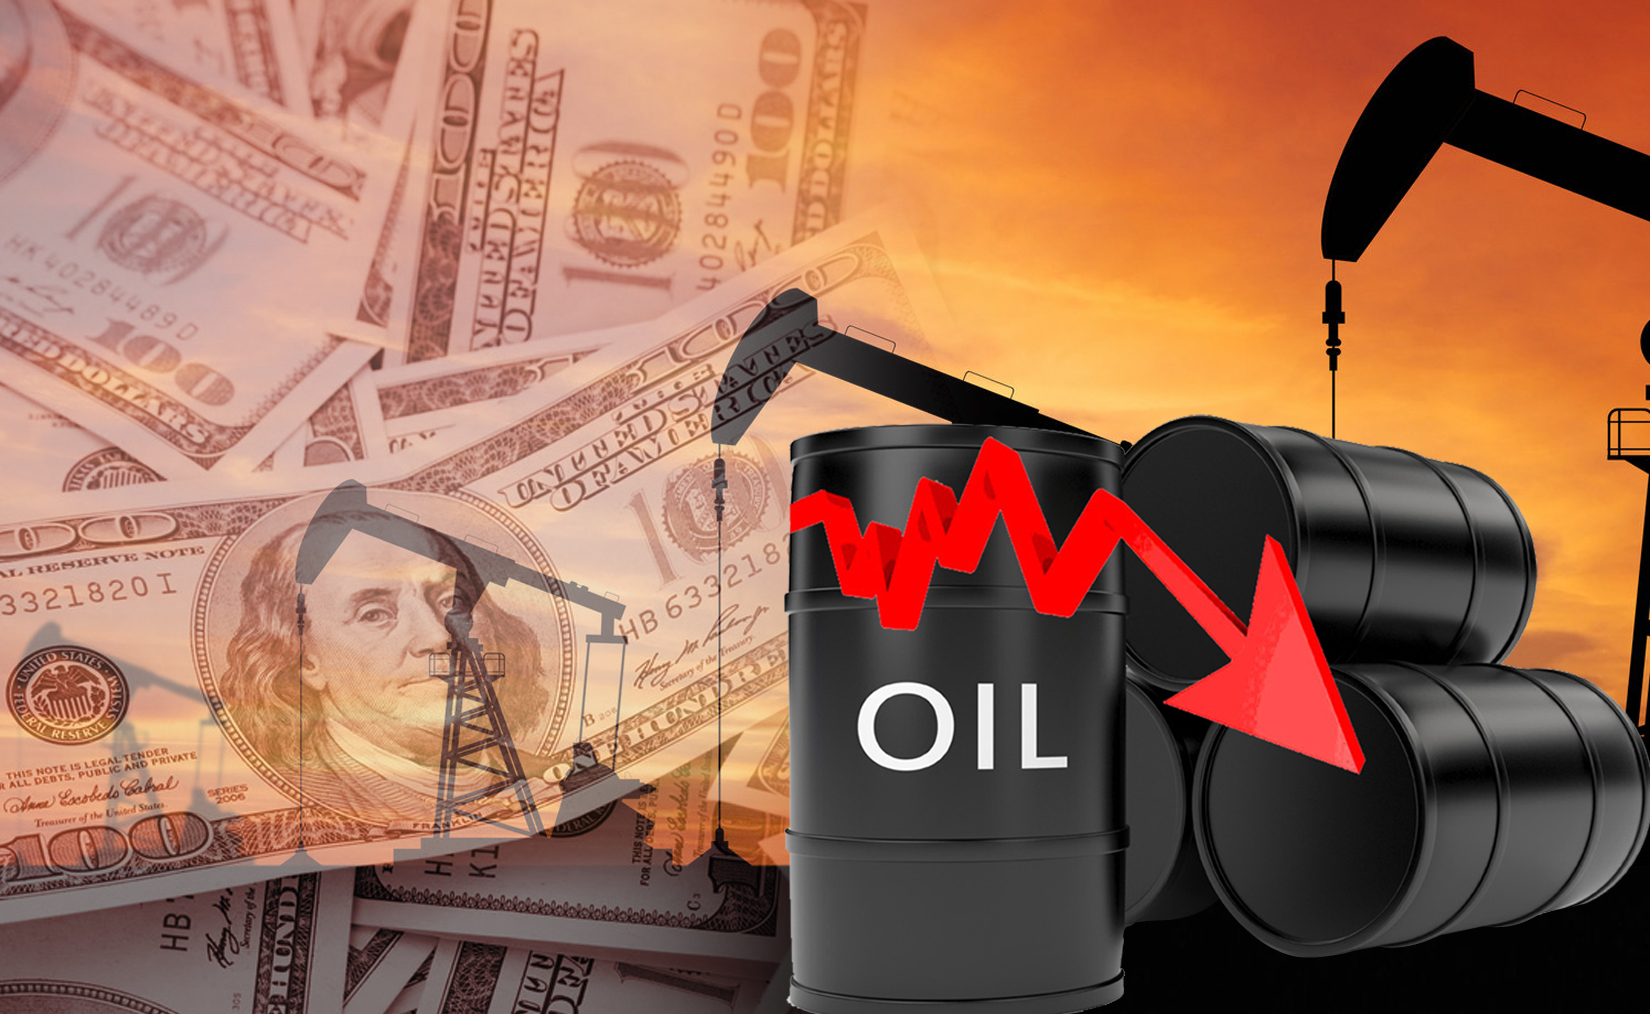 Kuwait crude oil sheds 42 cents Wed. to USD 73.46 pb - KPC                                                                                                                                                                                                